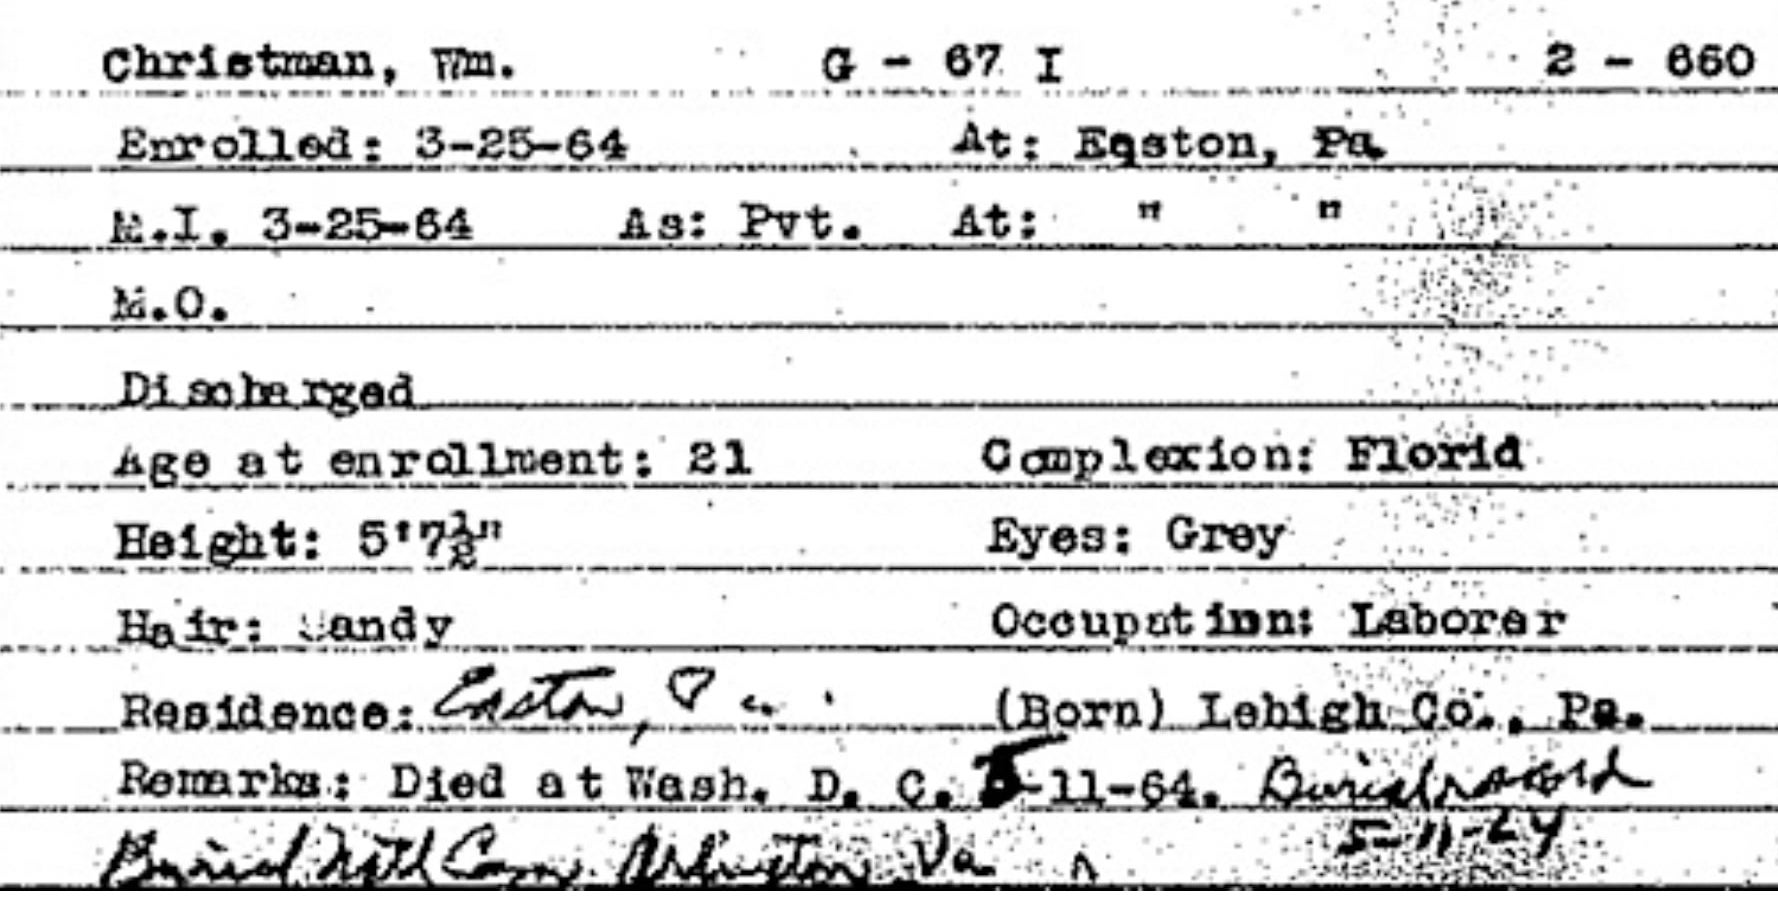 William Henry Christman’s Military Record